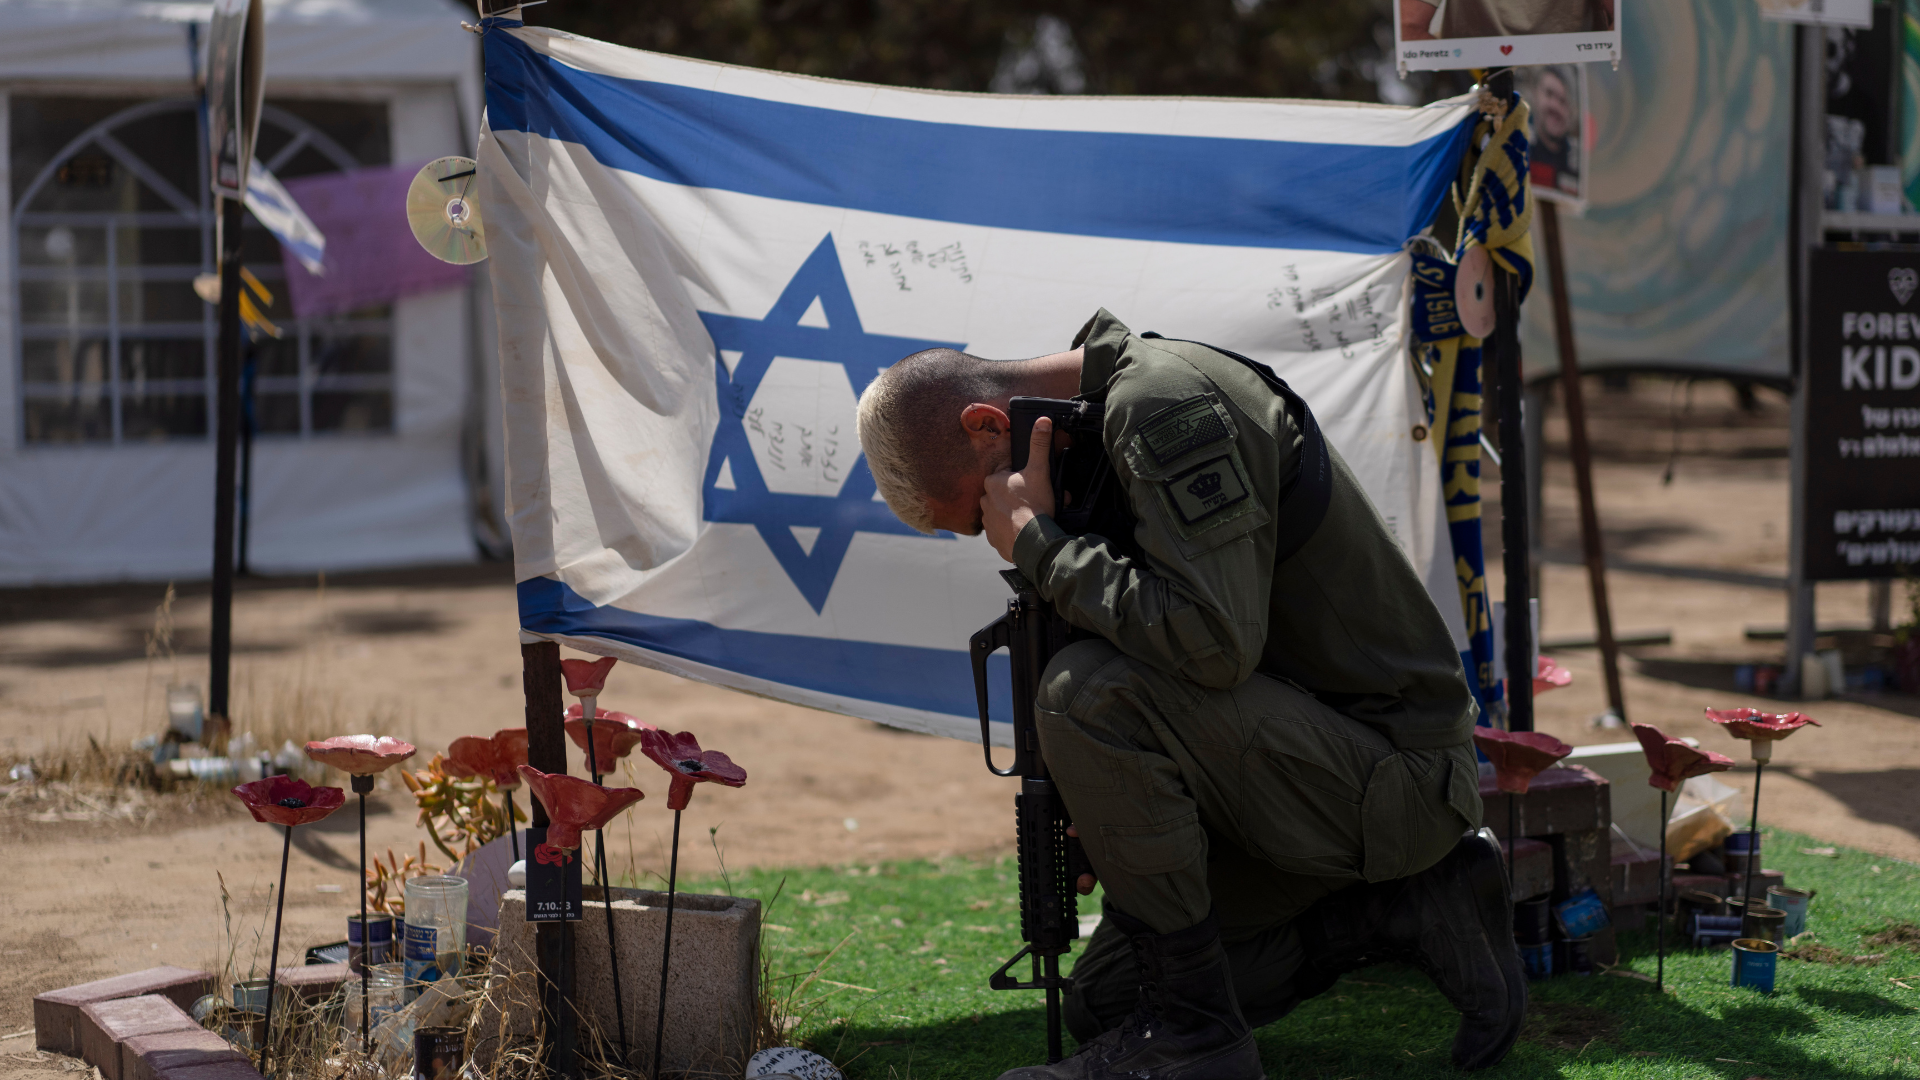 An Israeli soldier kneels next to the national flag during Israel's annual Memorial Day commemorations. /AP/Leo Correa 